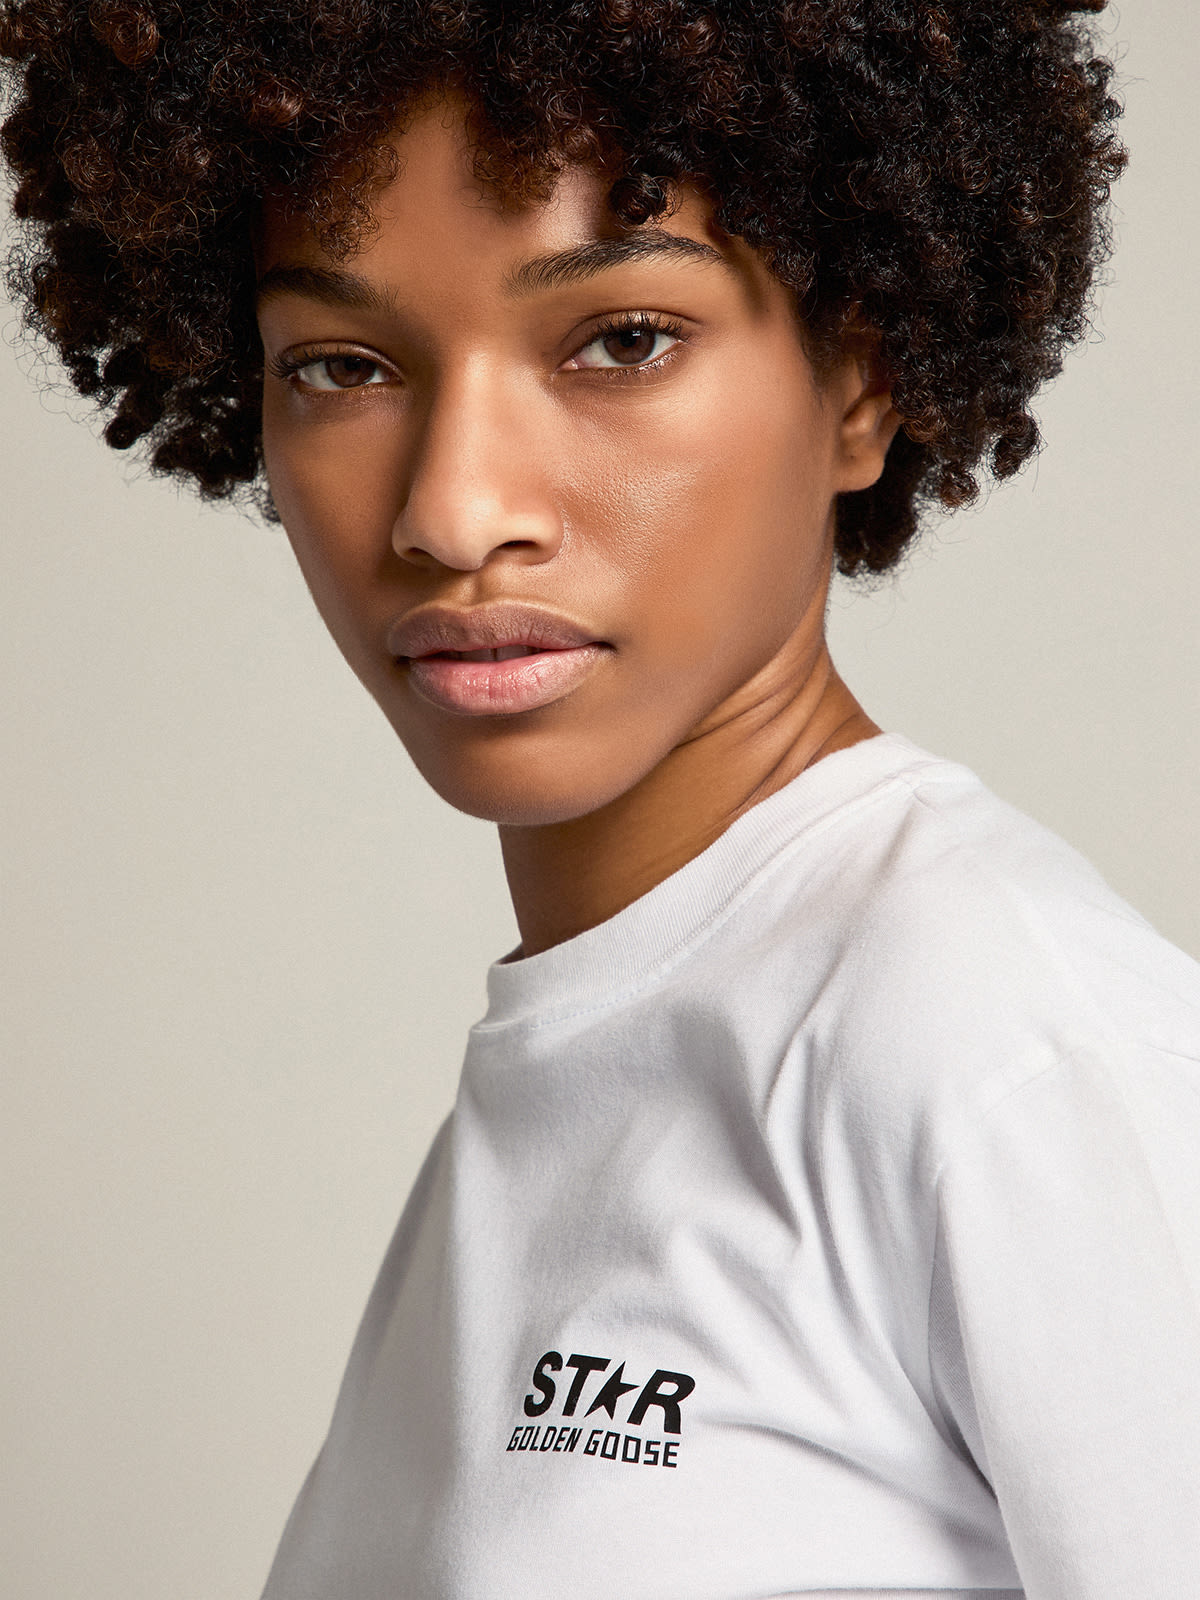 Golden Goose - Women's white T-shirt with contrasting black logo and star in 